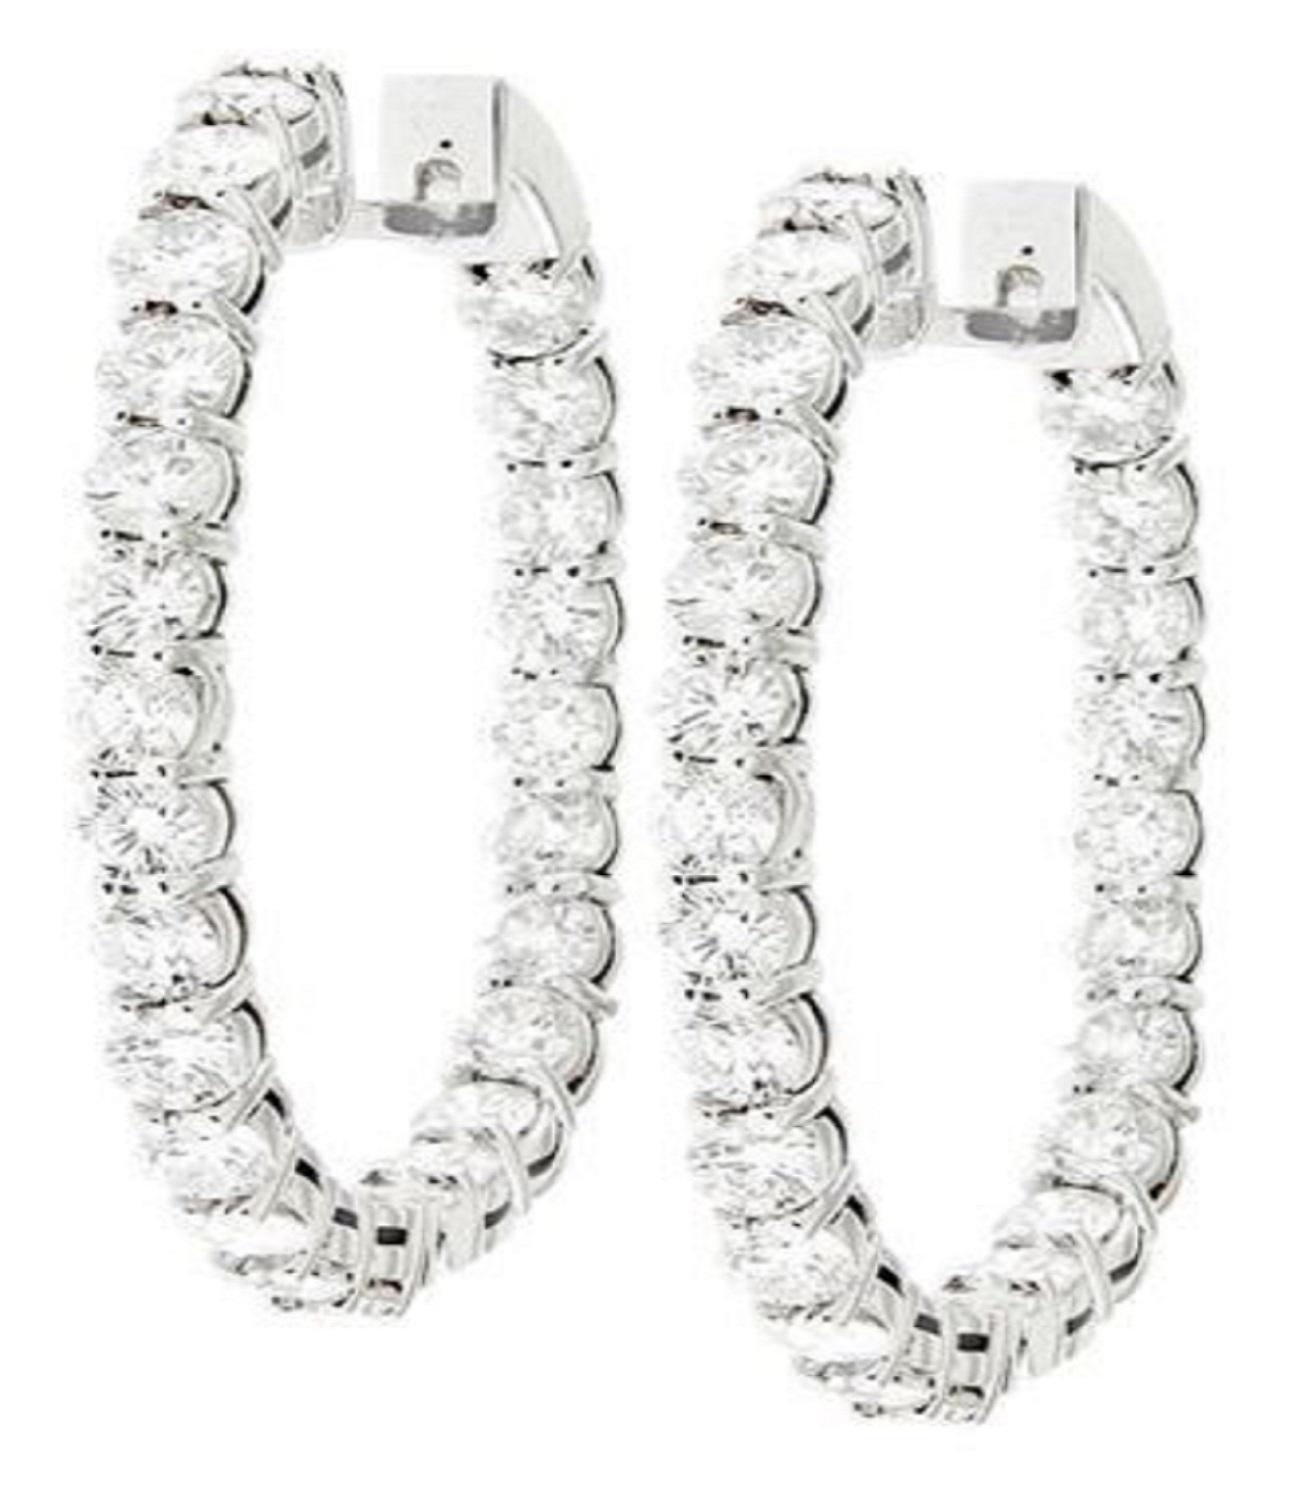 18 kt white gold inside-out hoop earrings adorned with 11.20 cts tw of round diamonds
Diana M. is a leading supplier of top-quality fine jewelry for over 35 years.
Diana M is one-stop shop for all your jewelry shopping, carrying line of diamond